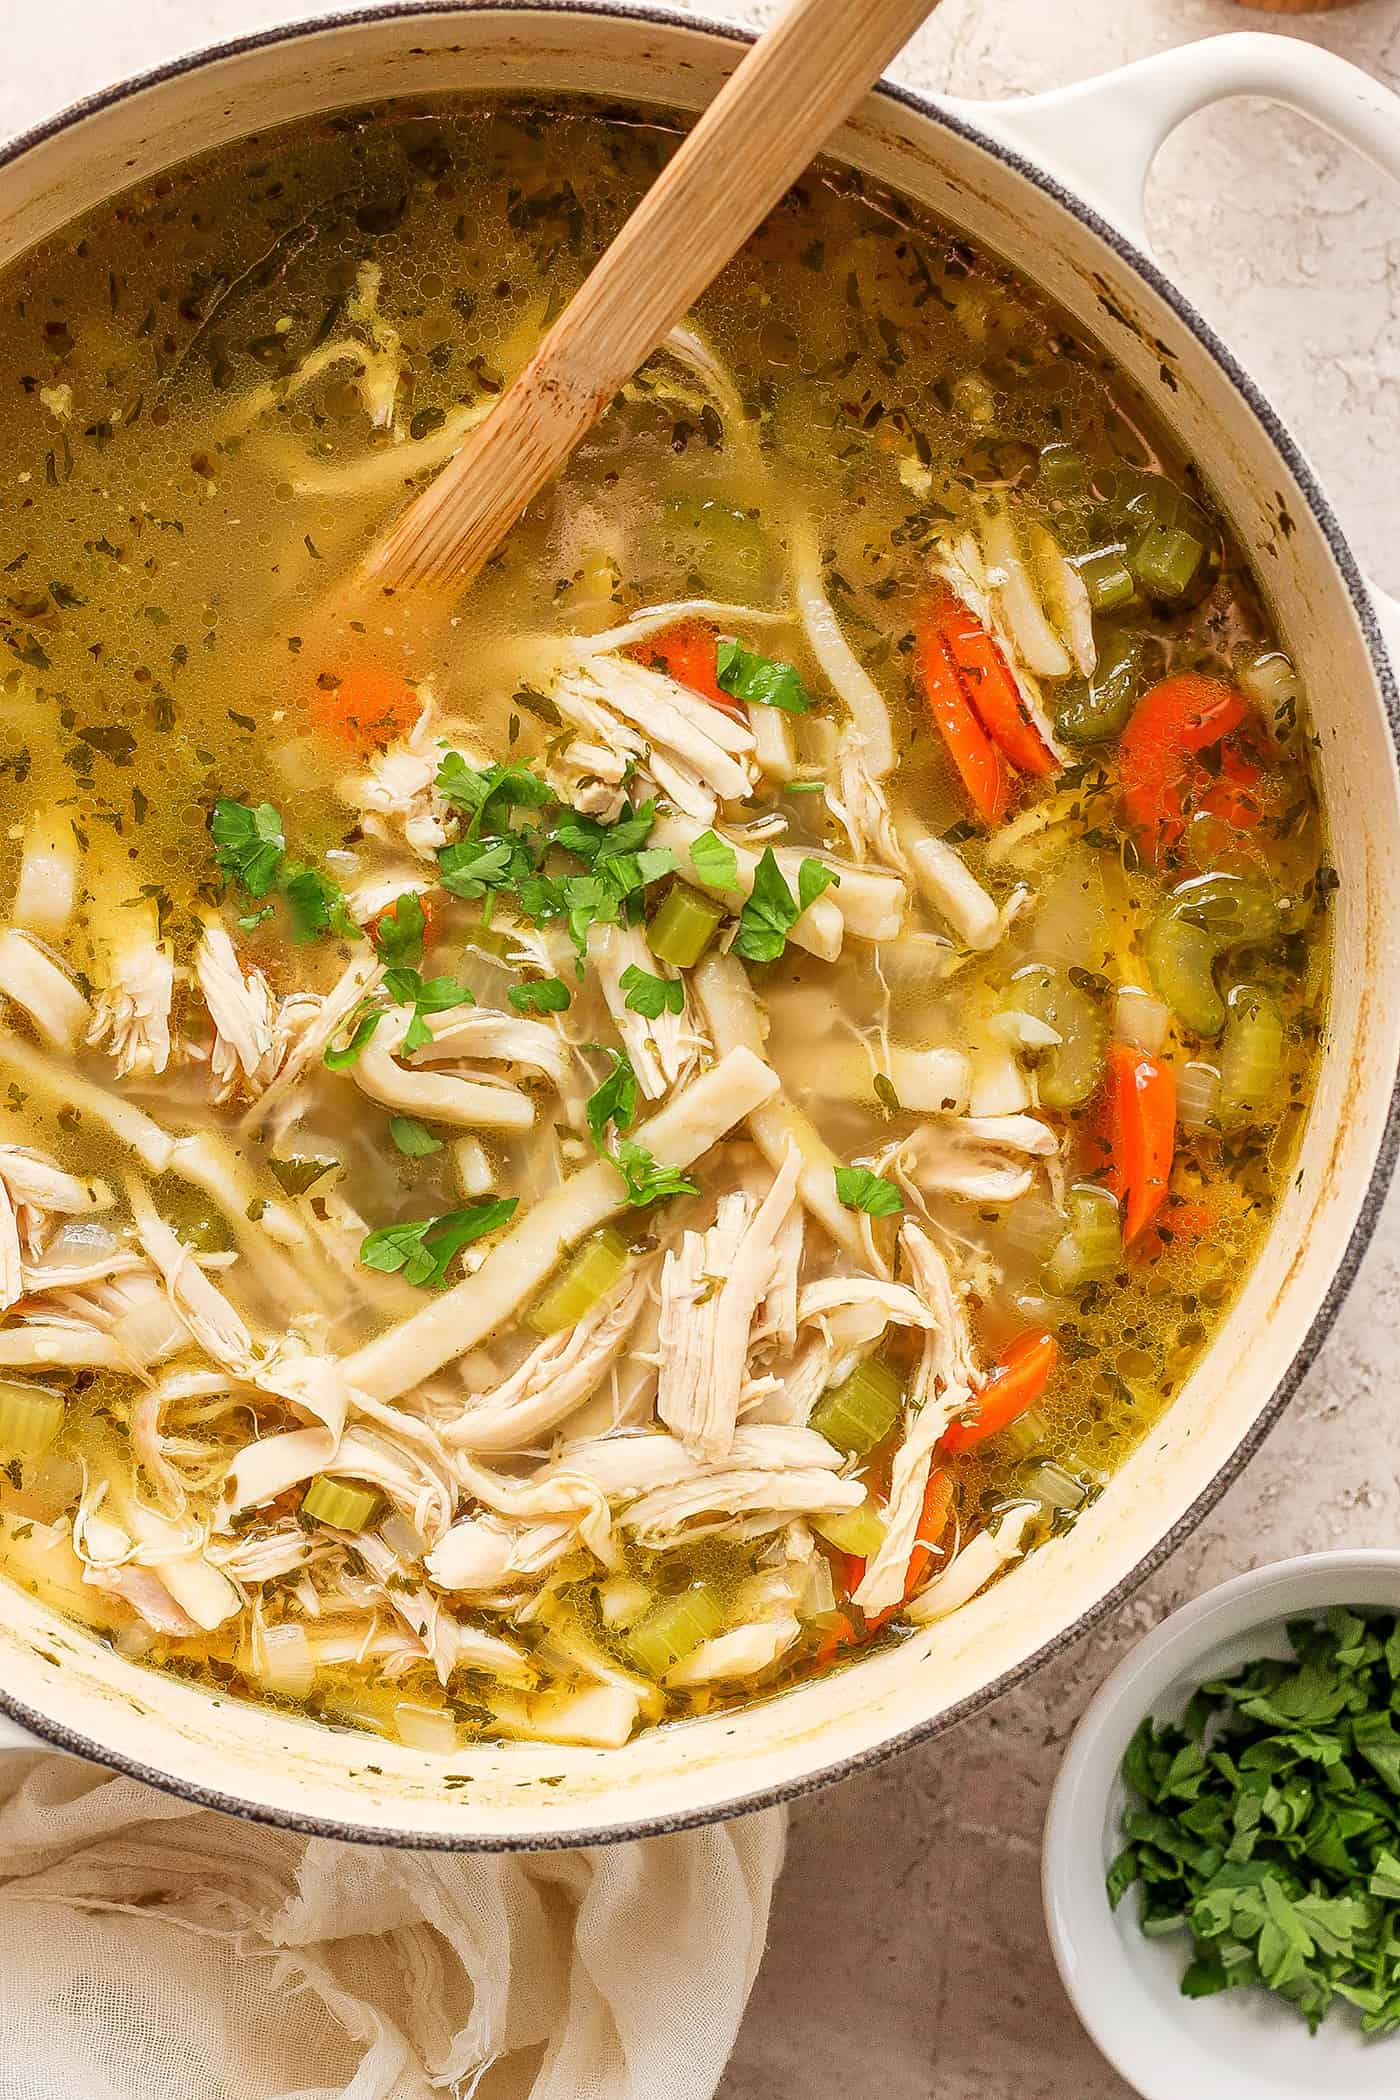 Shredded chicken, herbs and carrots are shown being stirred in a pot of chicken noodle soup.